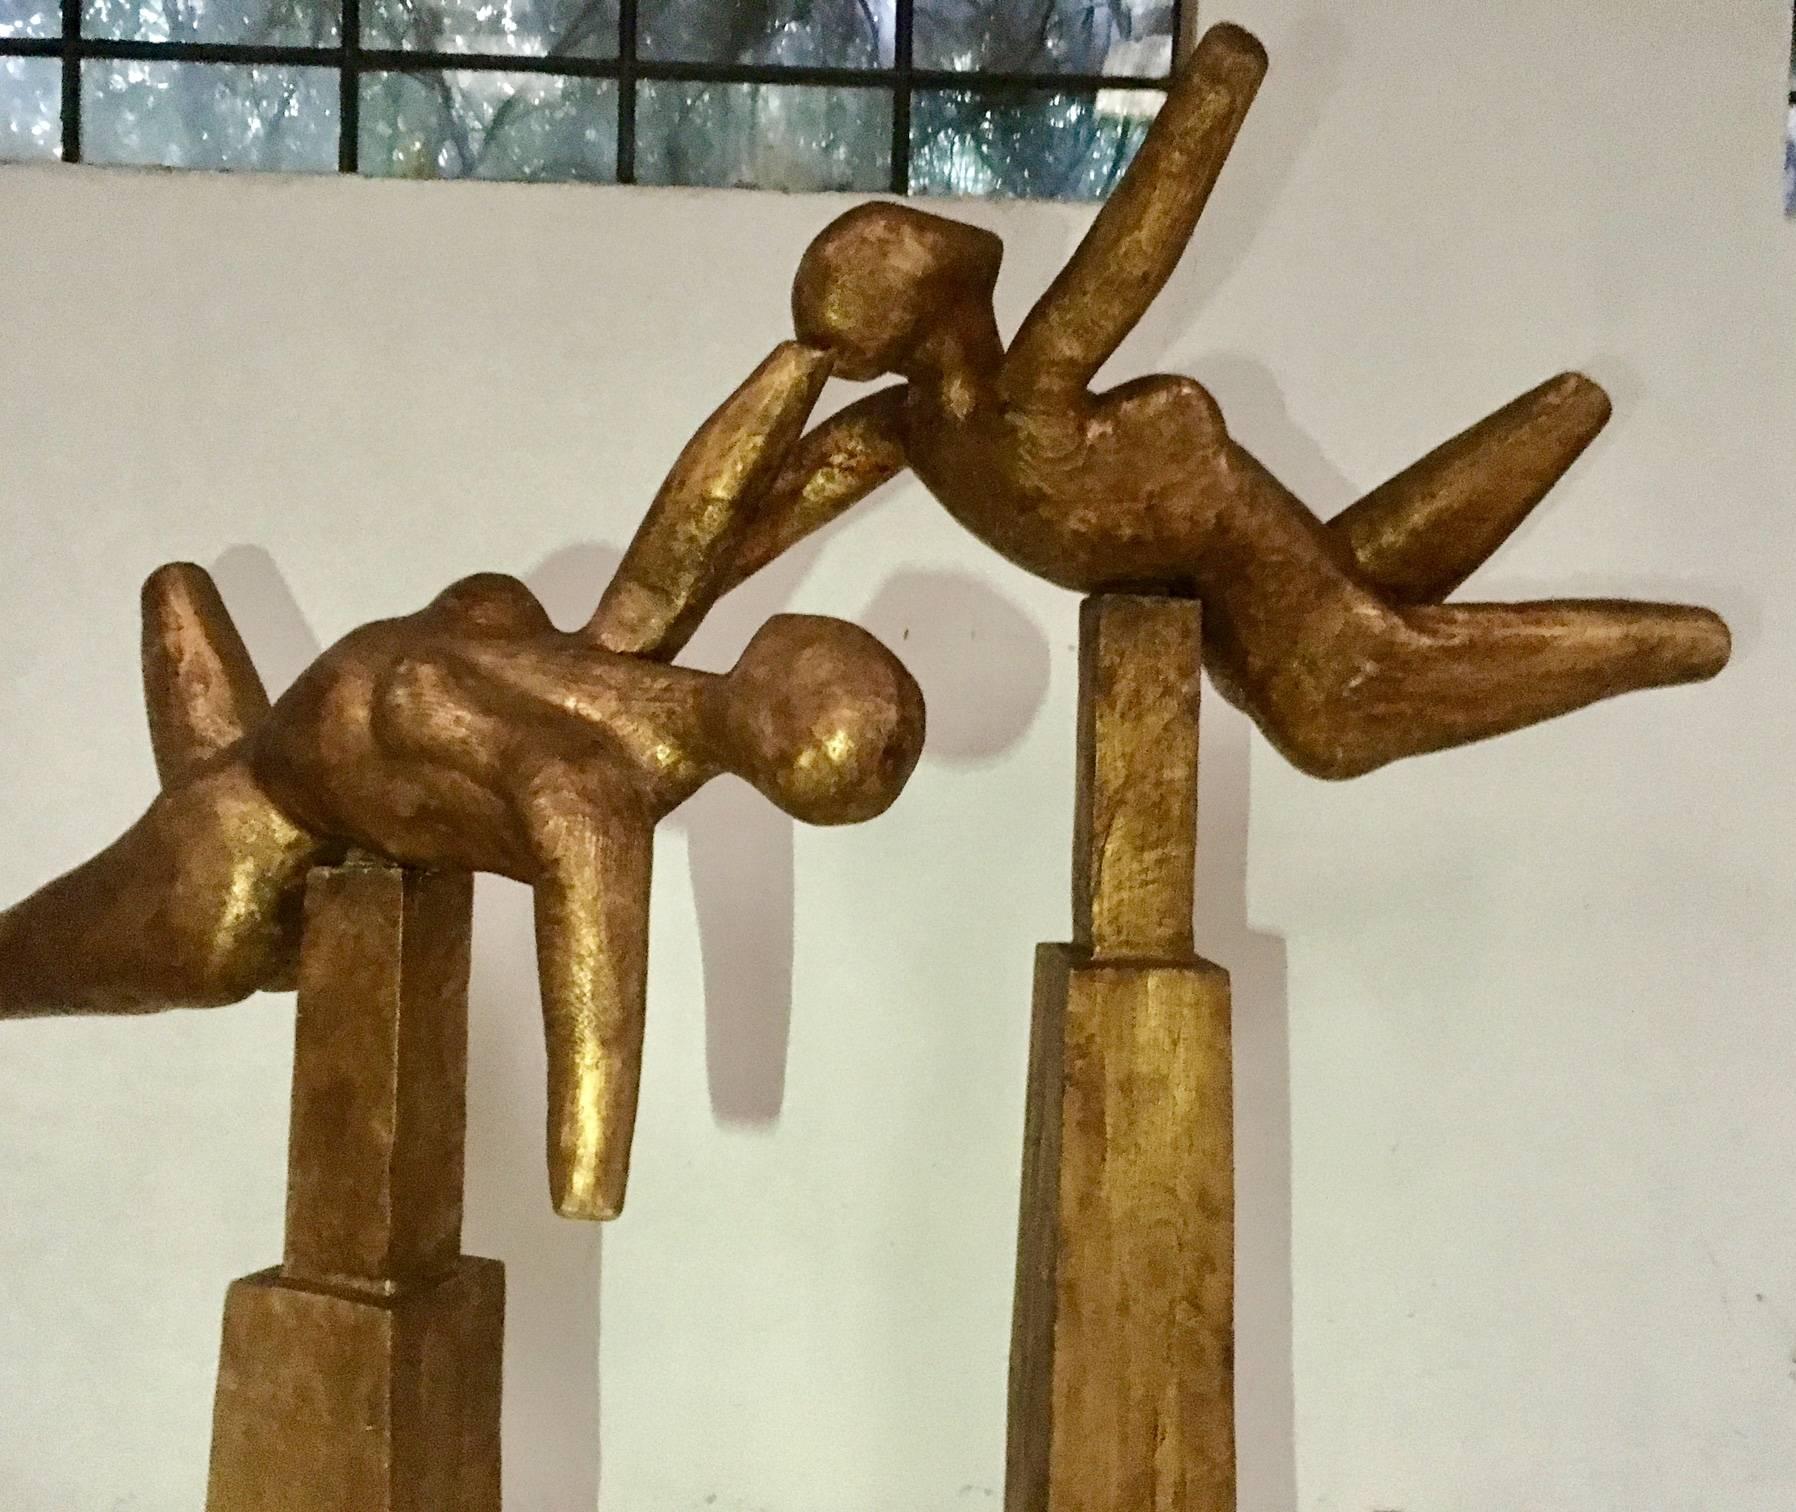 A massive sculpture by Californian artist Geoffrey Greene featuring two abstract figures representing two goddesses.
Title: Goddesses of the Air.
Wood and gold leaf
Size 150 cm large by 50 cm deep x by 205 cm High
145 cm large by 70 cm deep x by